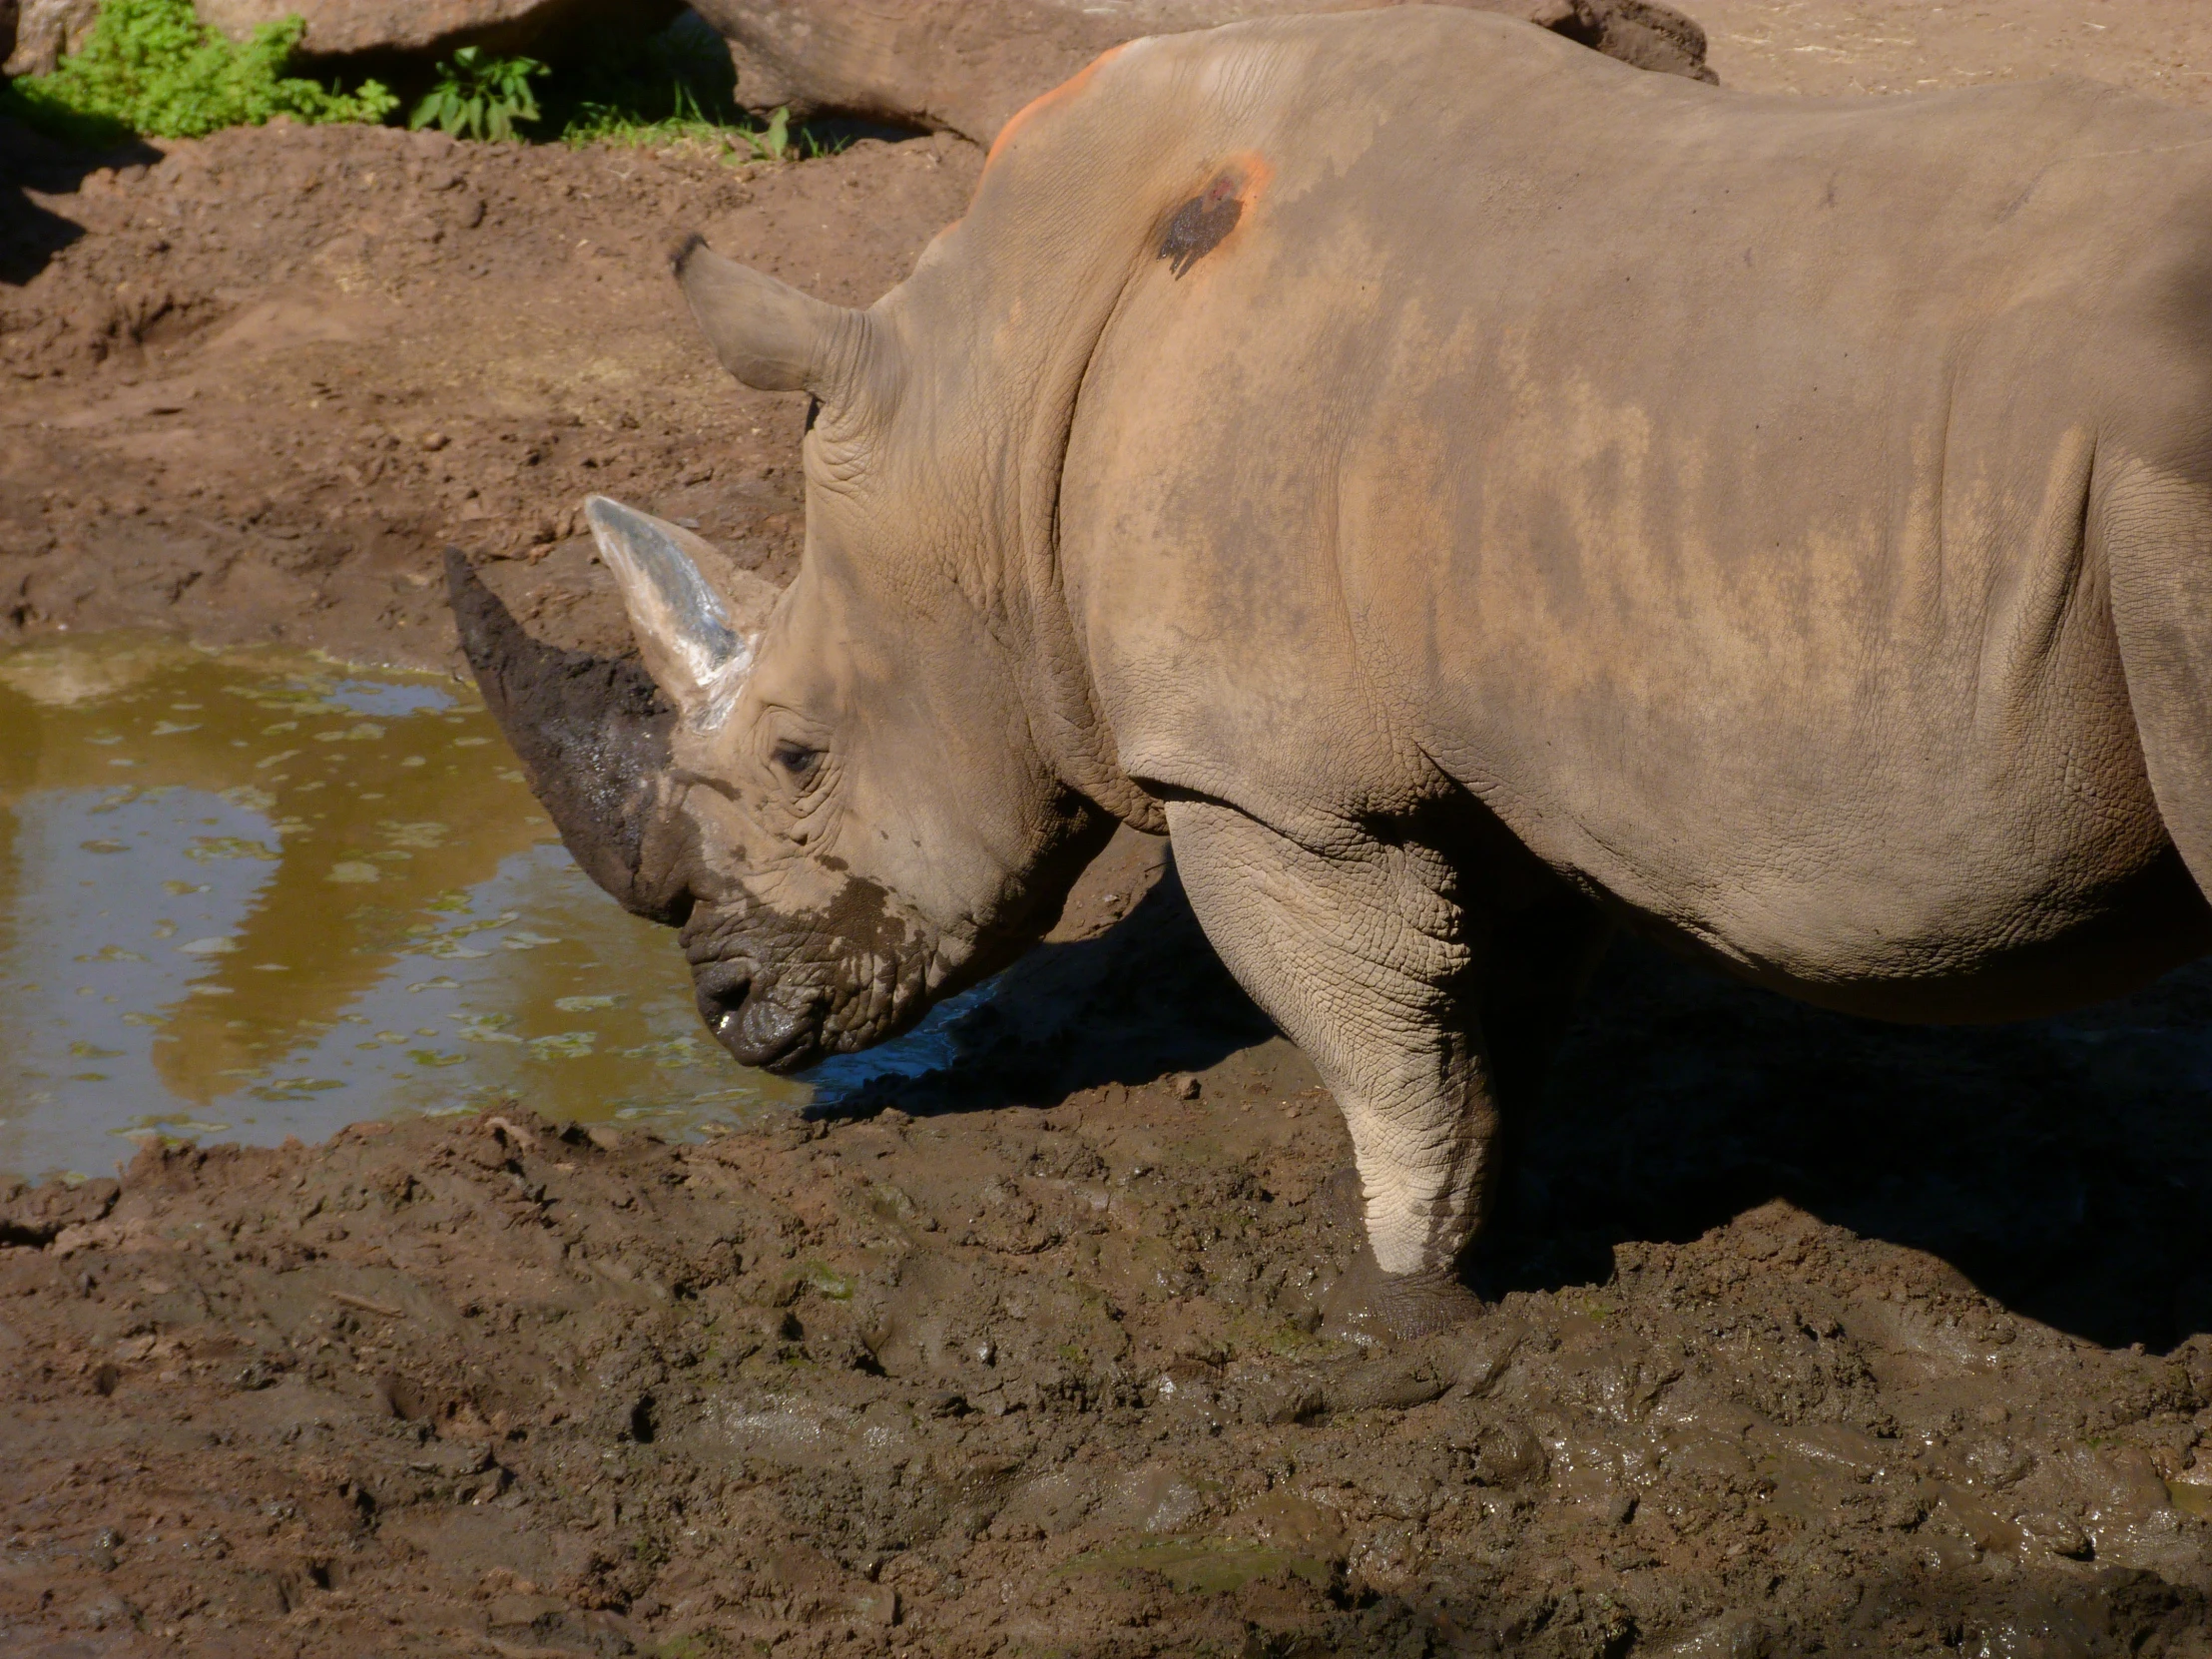 a rhino that is in the dirt near some water